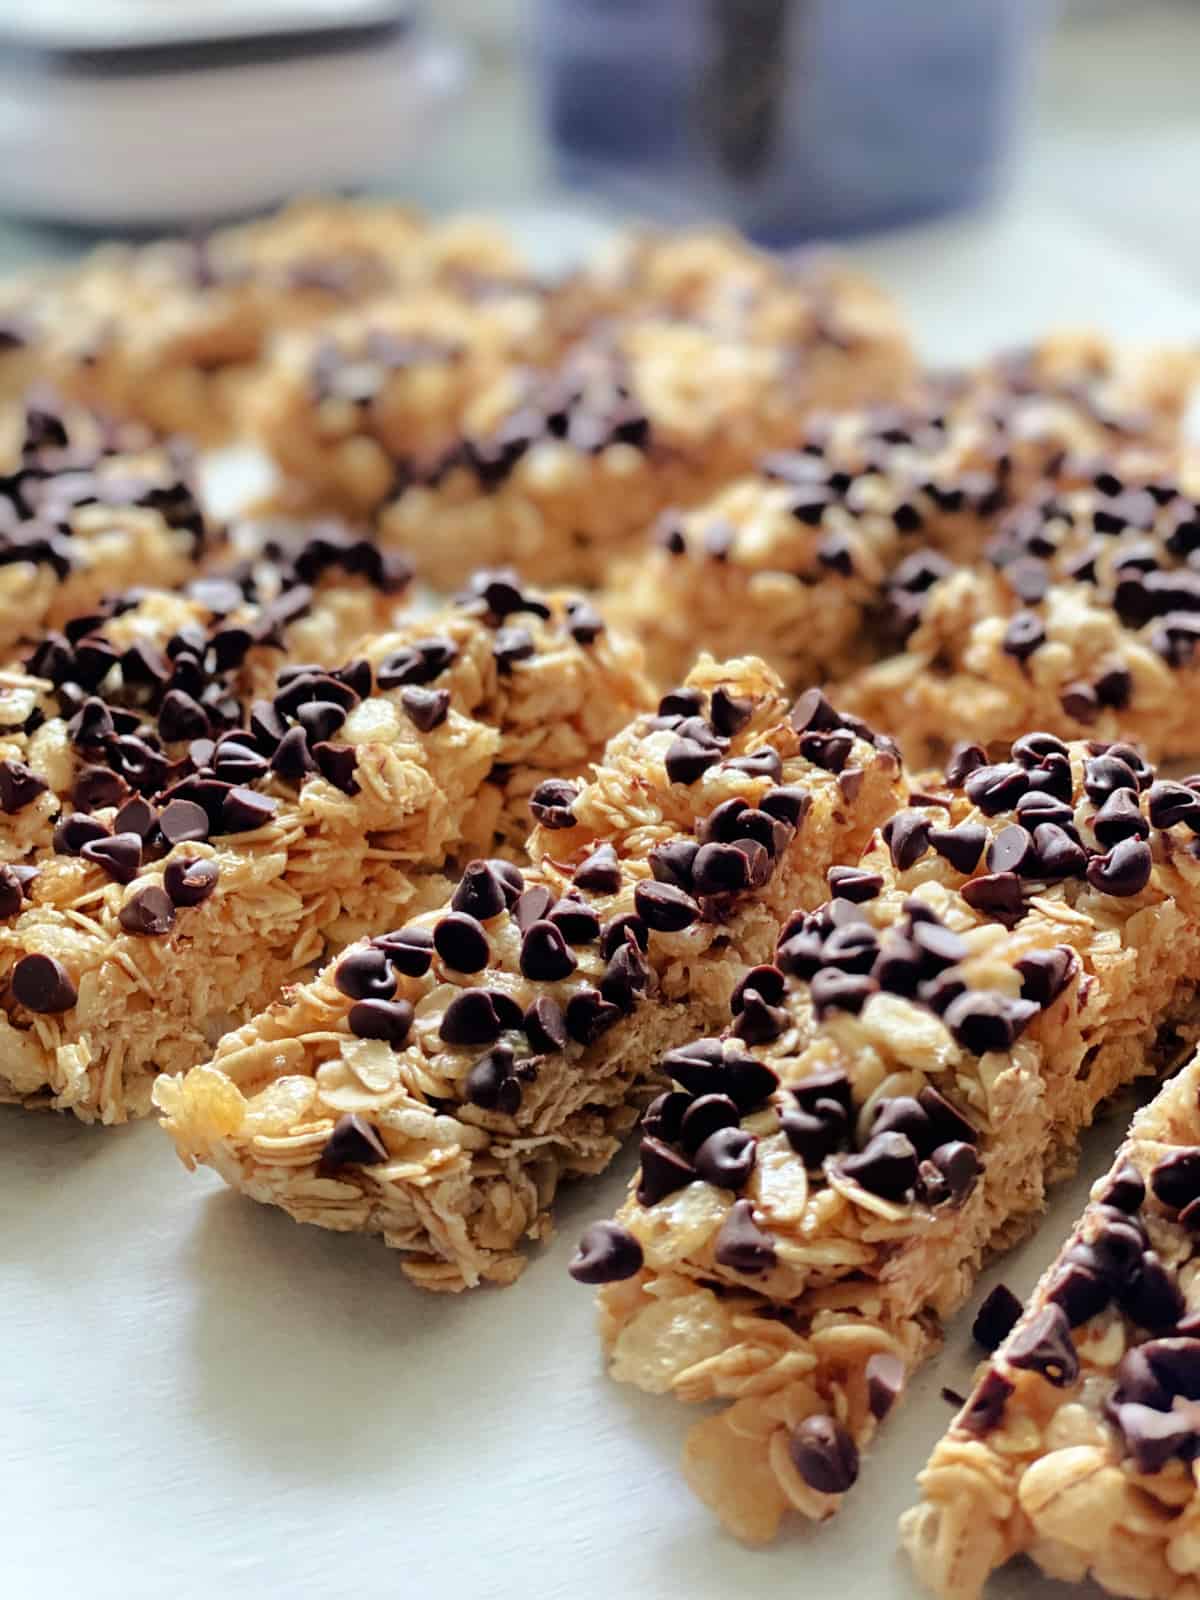 Homemade granola bars with mini chocolate chips lined up on parchment papered countertop.